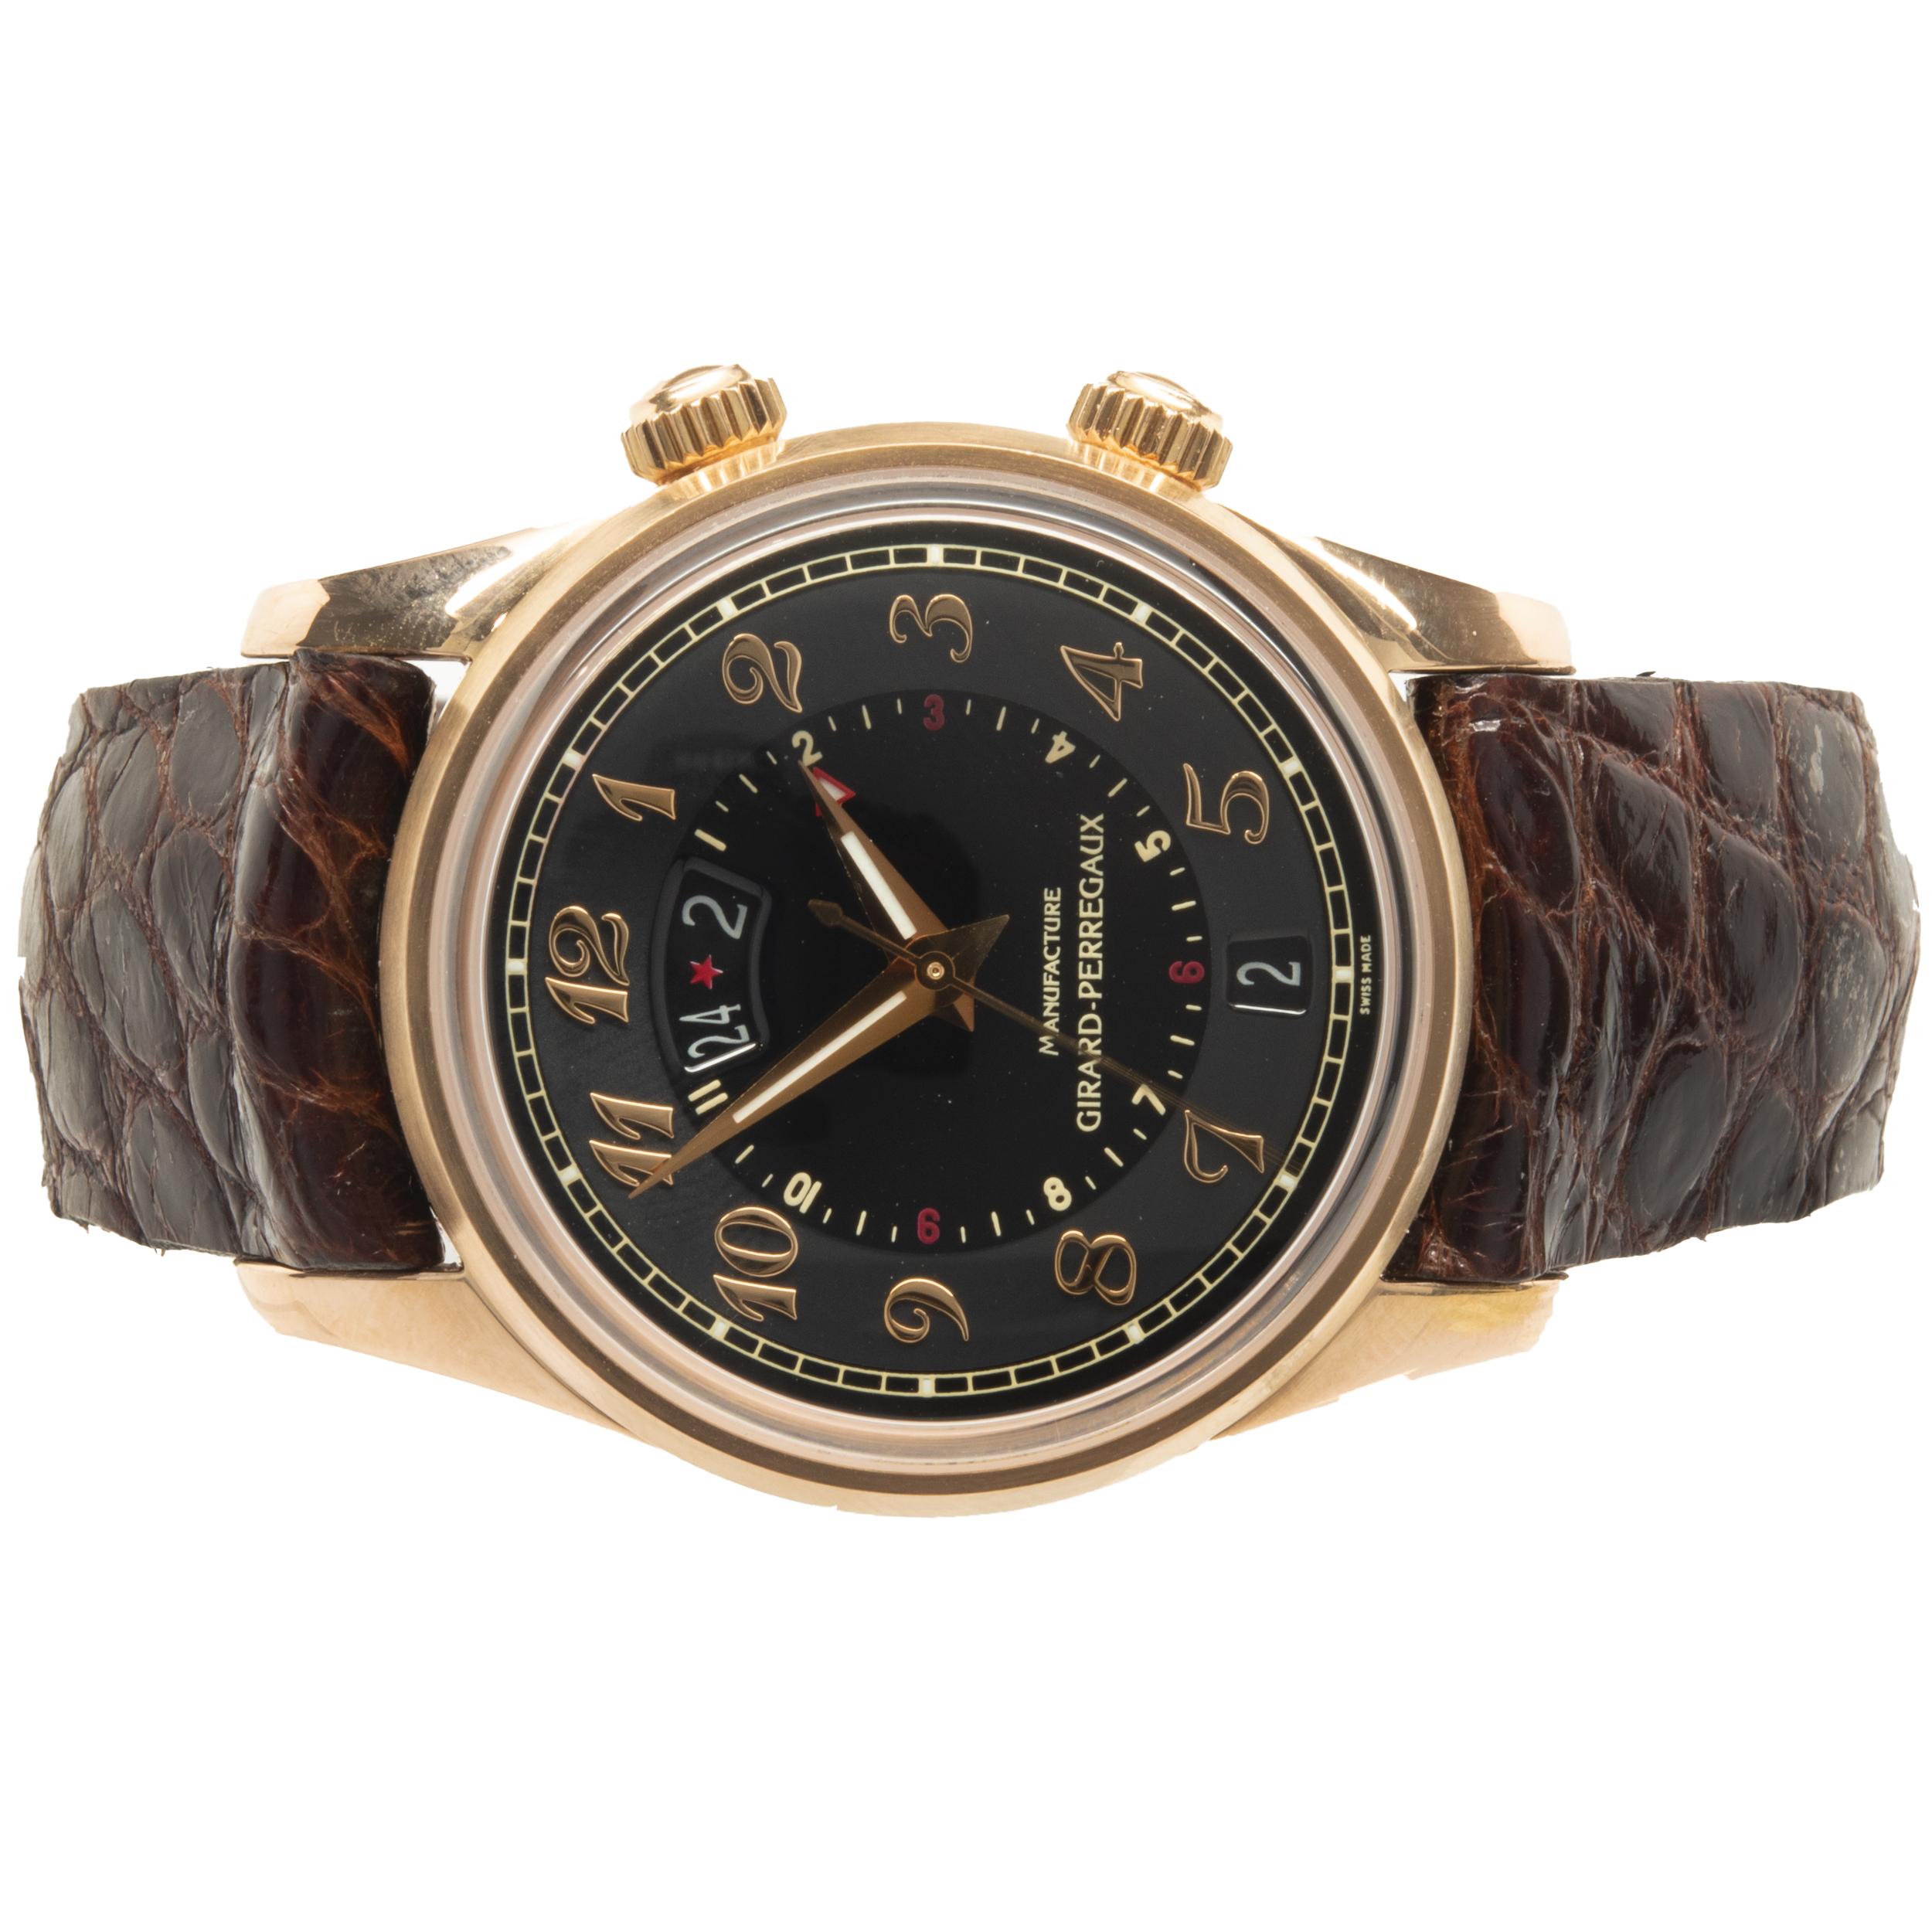 Movement: automatic
Function: hours, minutes, seconds, date, alarm, GMT
Case: round 40mm 18K rose gold case with sapphire crystal
Band: brown leather strap with buckle
Dial: black Arabic dial, with alarm
Serial #: XXX
Reference #: 4940
	
Complete